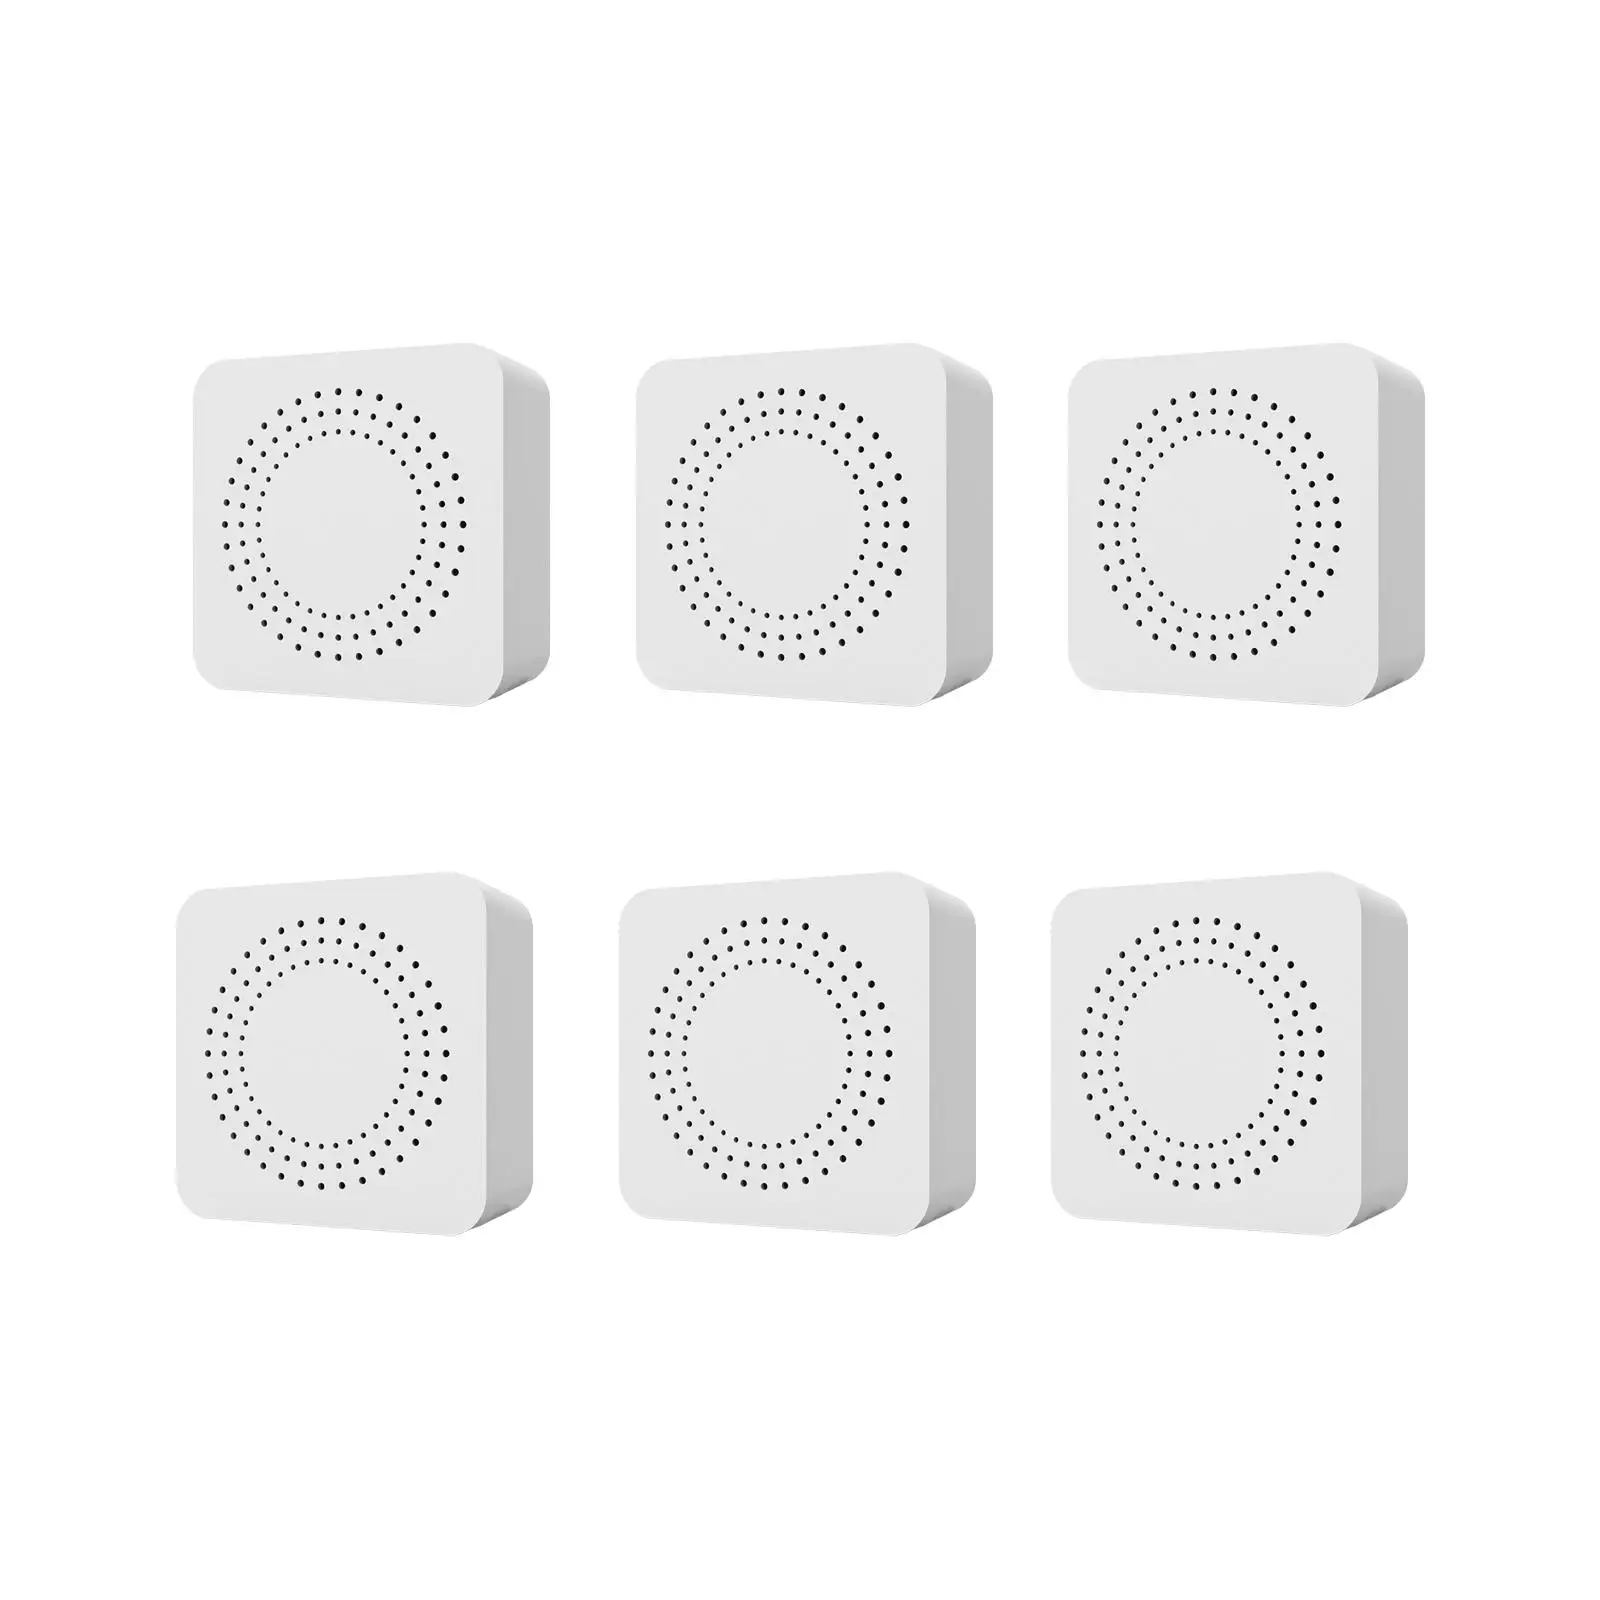 

Mini Smart Switch Voice Control Sharing Function App Remote Smart Light Switch DIY Light Switches for Bedroom Office Living Room